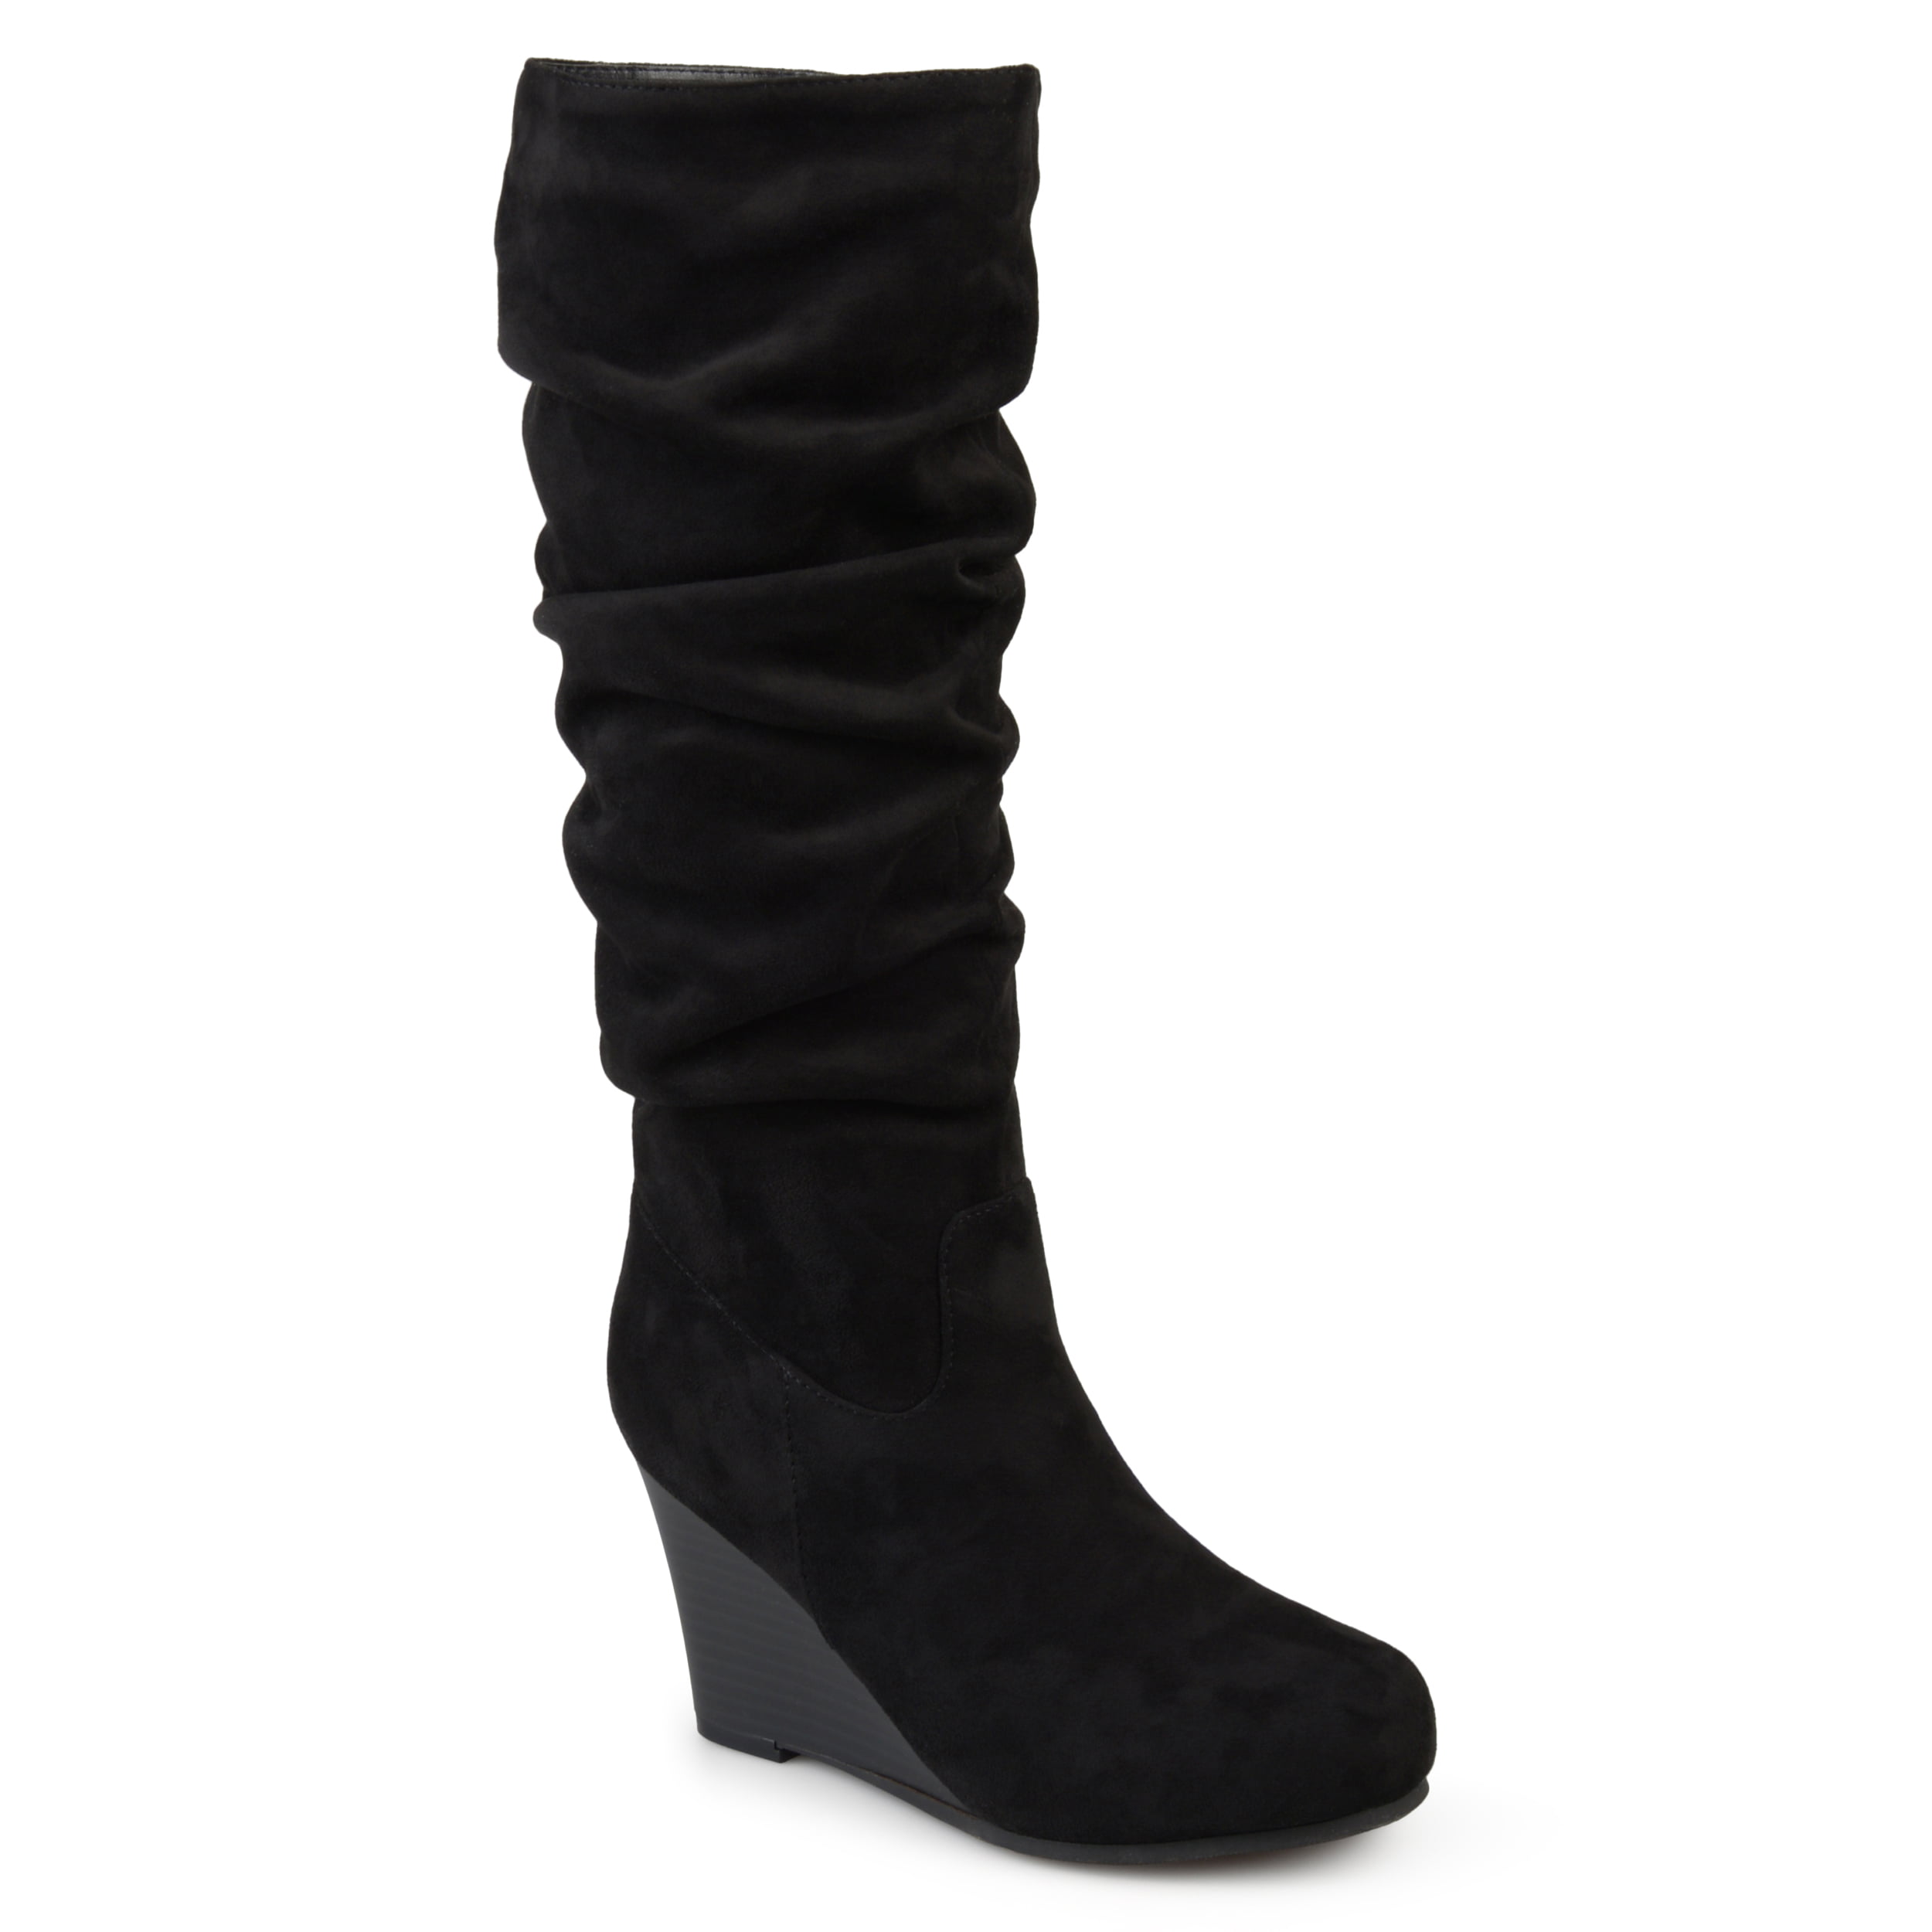 Women S Wide Calf Slouchy Faux Suede Mid Calf Wedge Boots